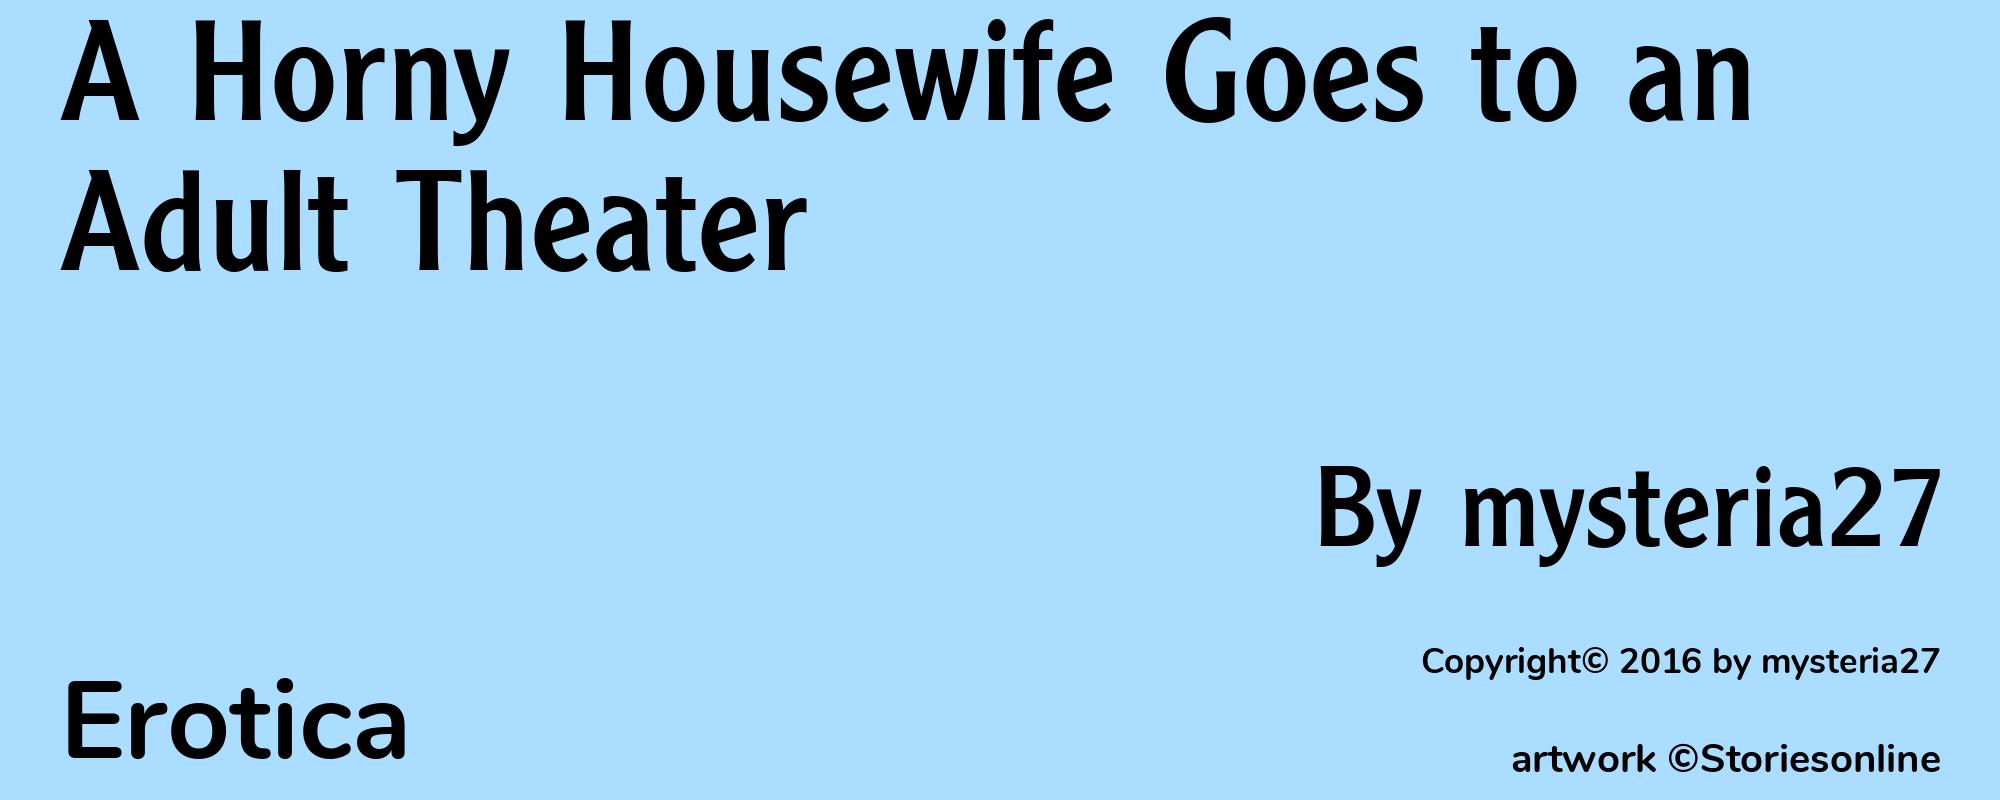 A Horny Housewife Goes to an Adult Theater - Cover